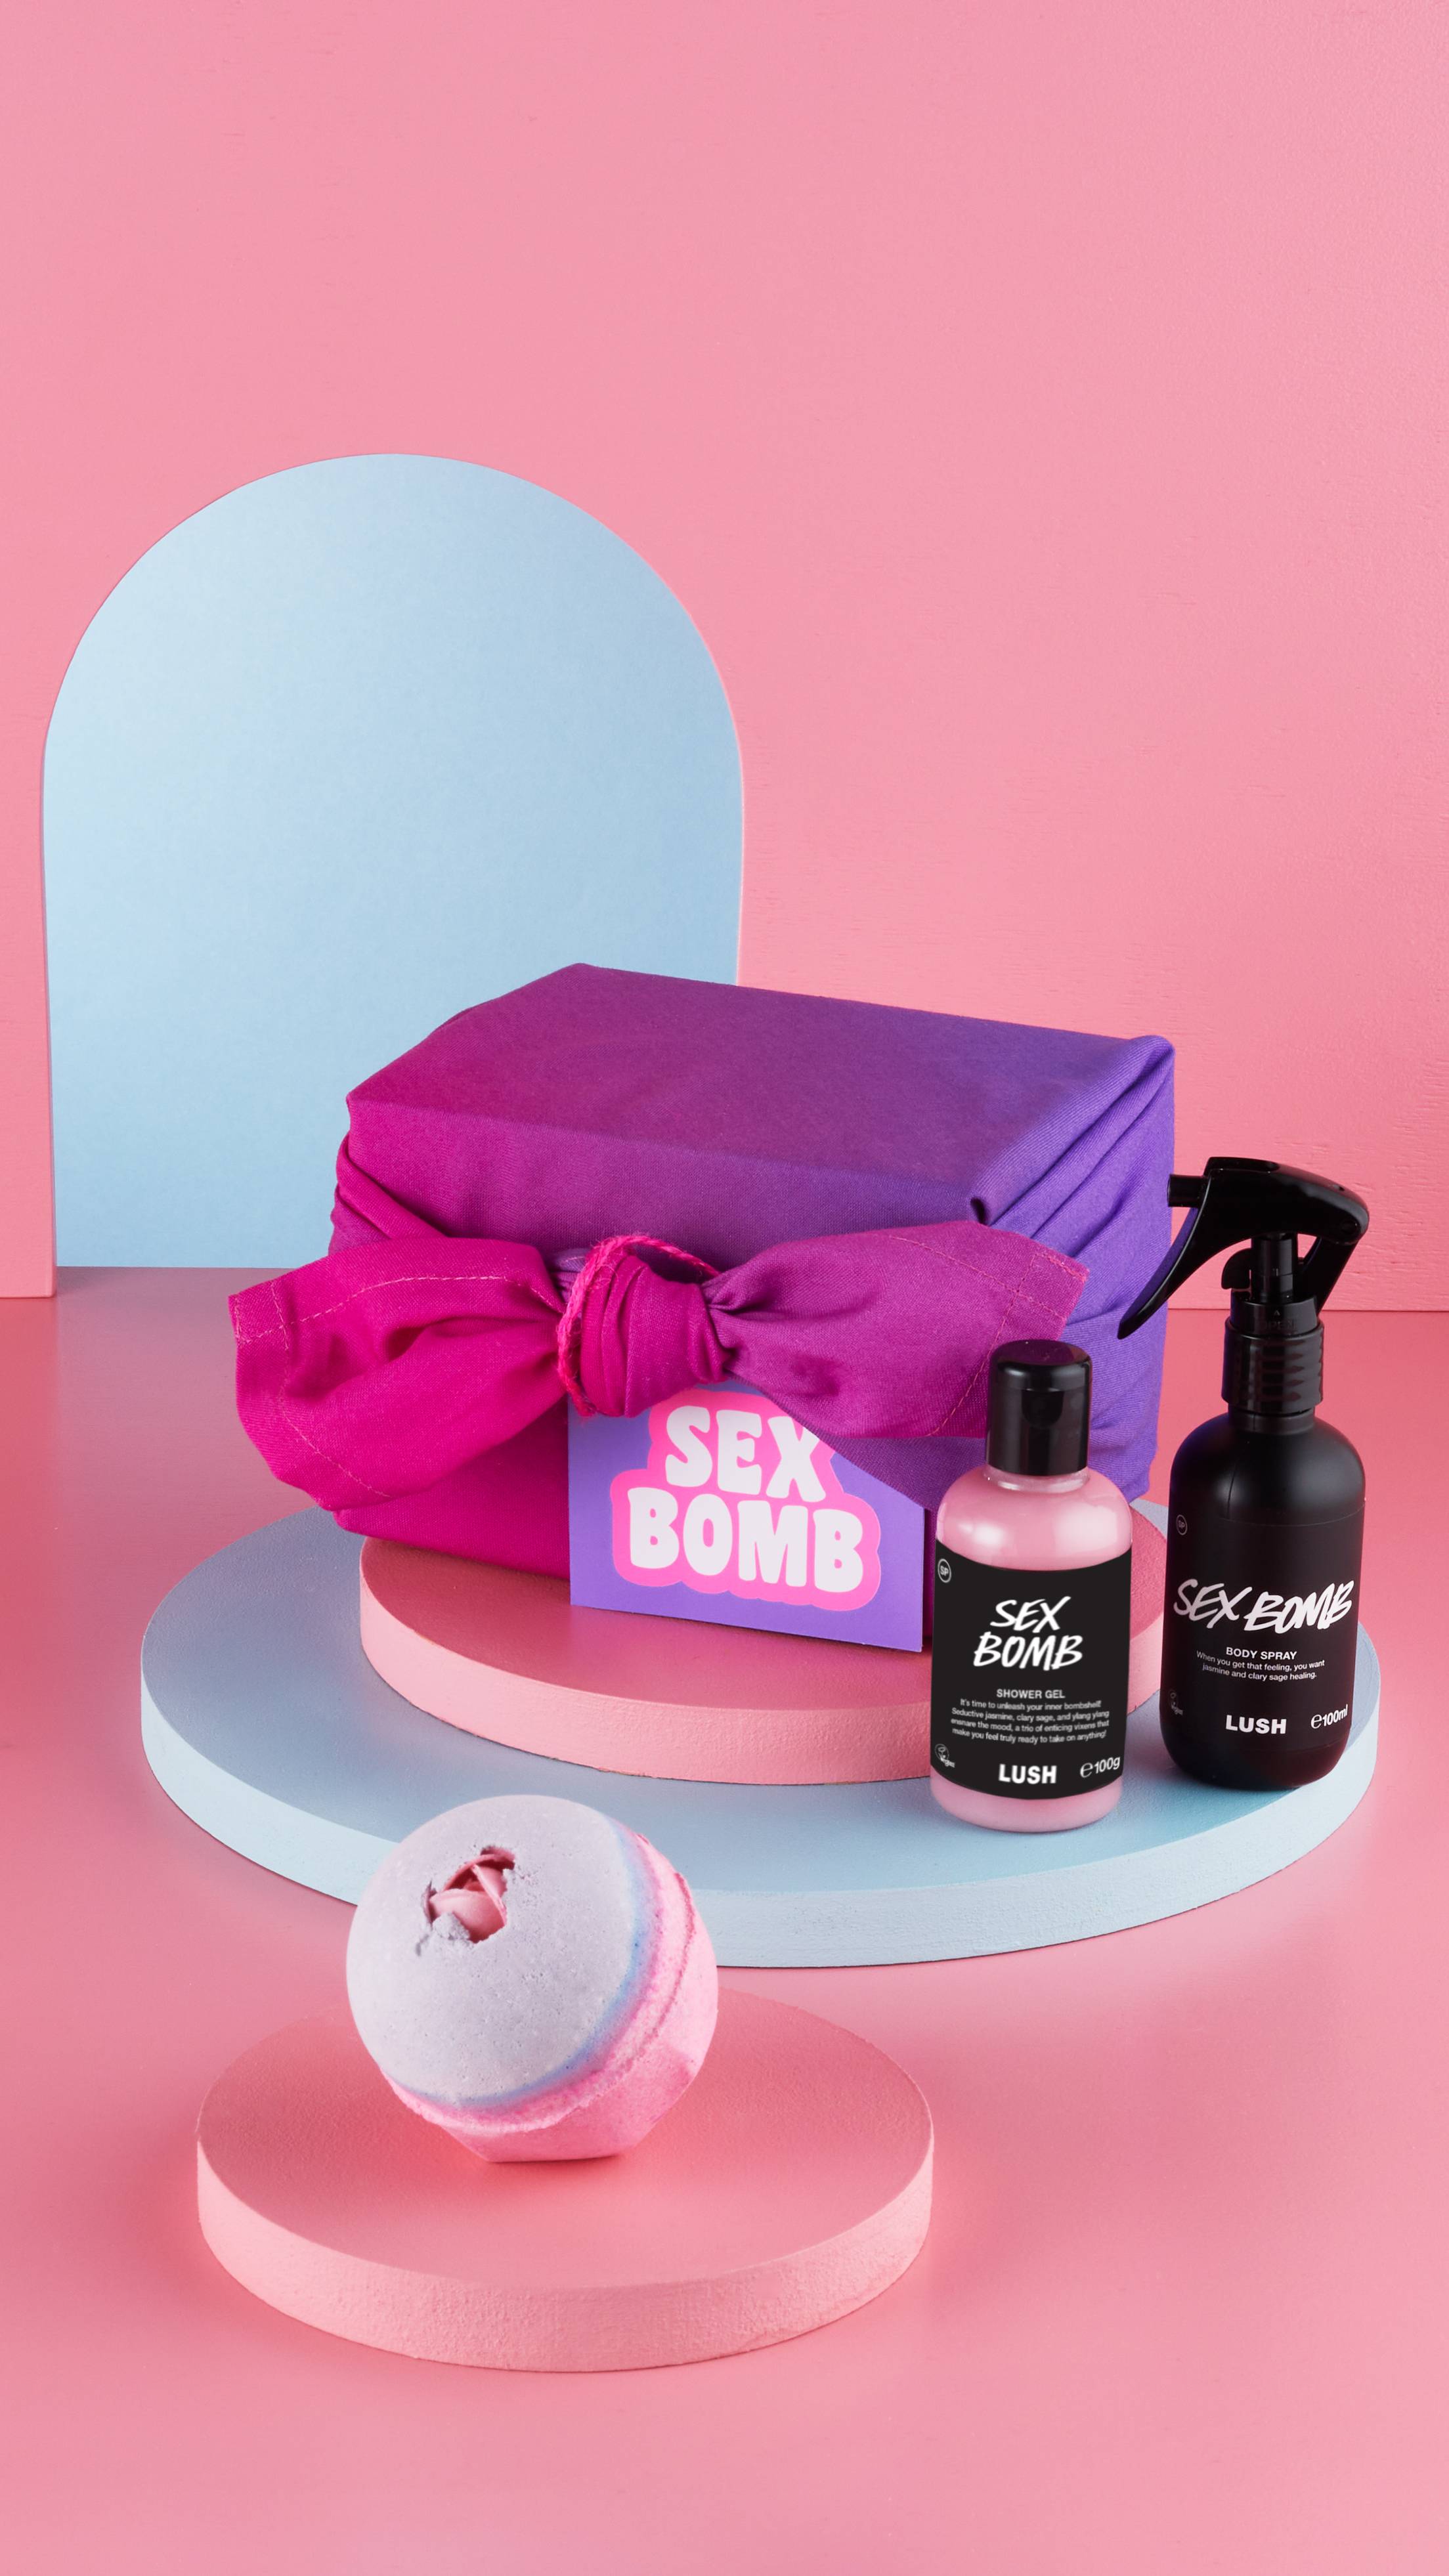 The Sex Bomb wrapped gift box sits surrounded by the included shower gel, bath bomb and body spray.